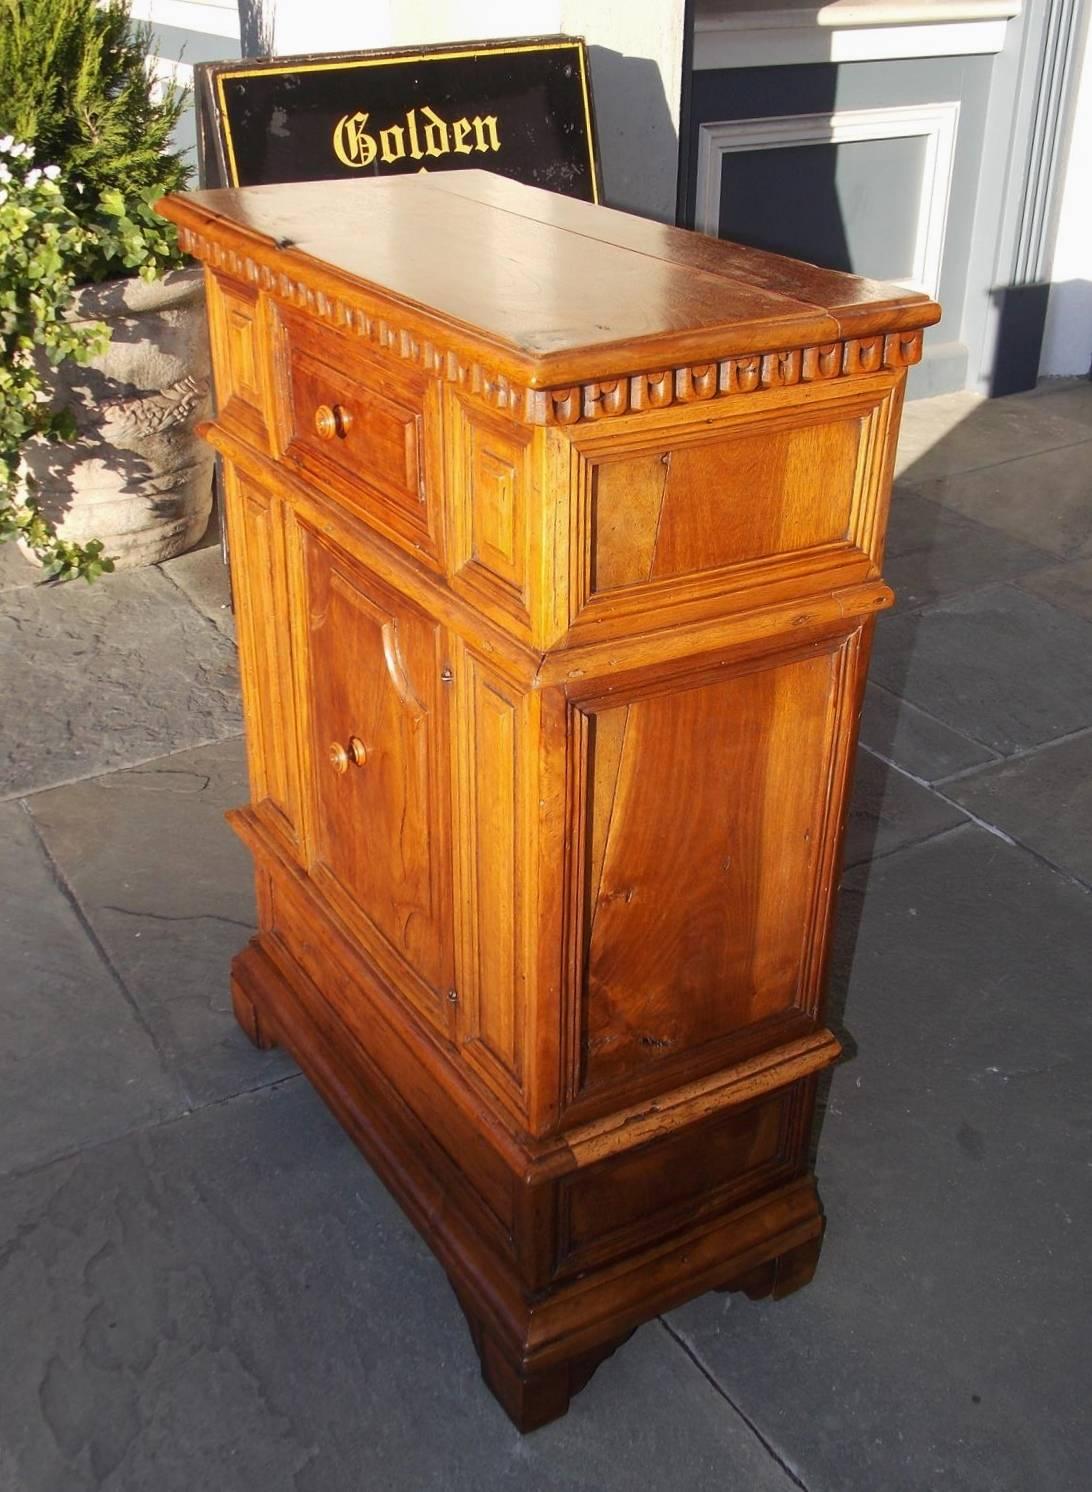 Italian walnut Rococo cupboard with a carved molded edge top, decorative incised carvings, upper single drawer and a lower cabinet with the original wooden knobs, original locking mechanism, and terminating on the original bracket feet. Secondary